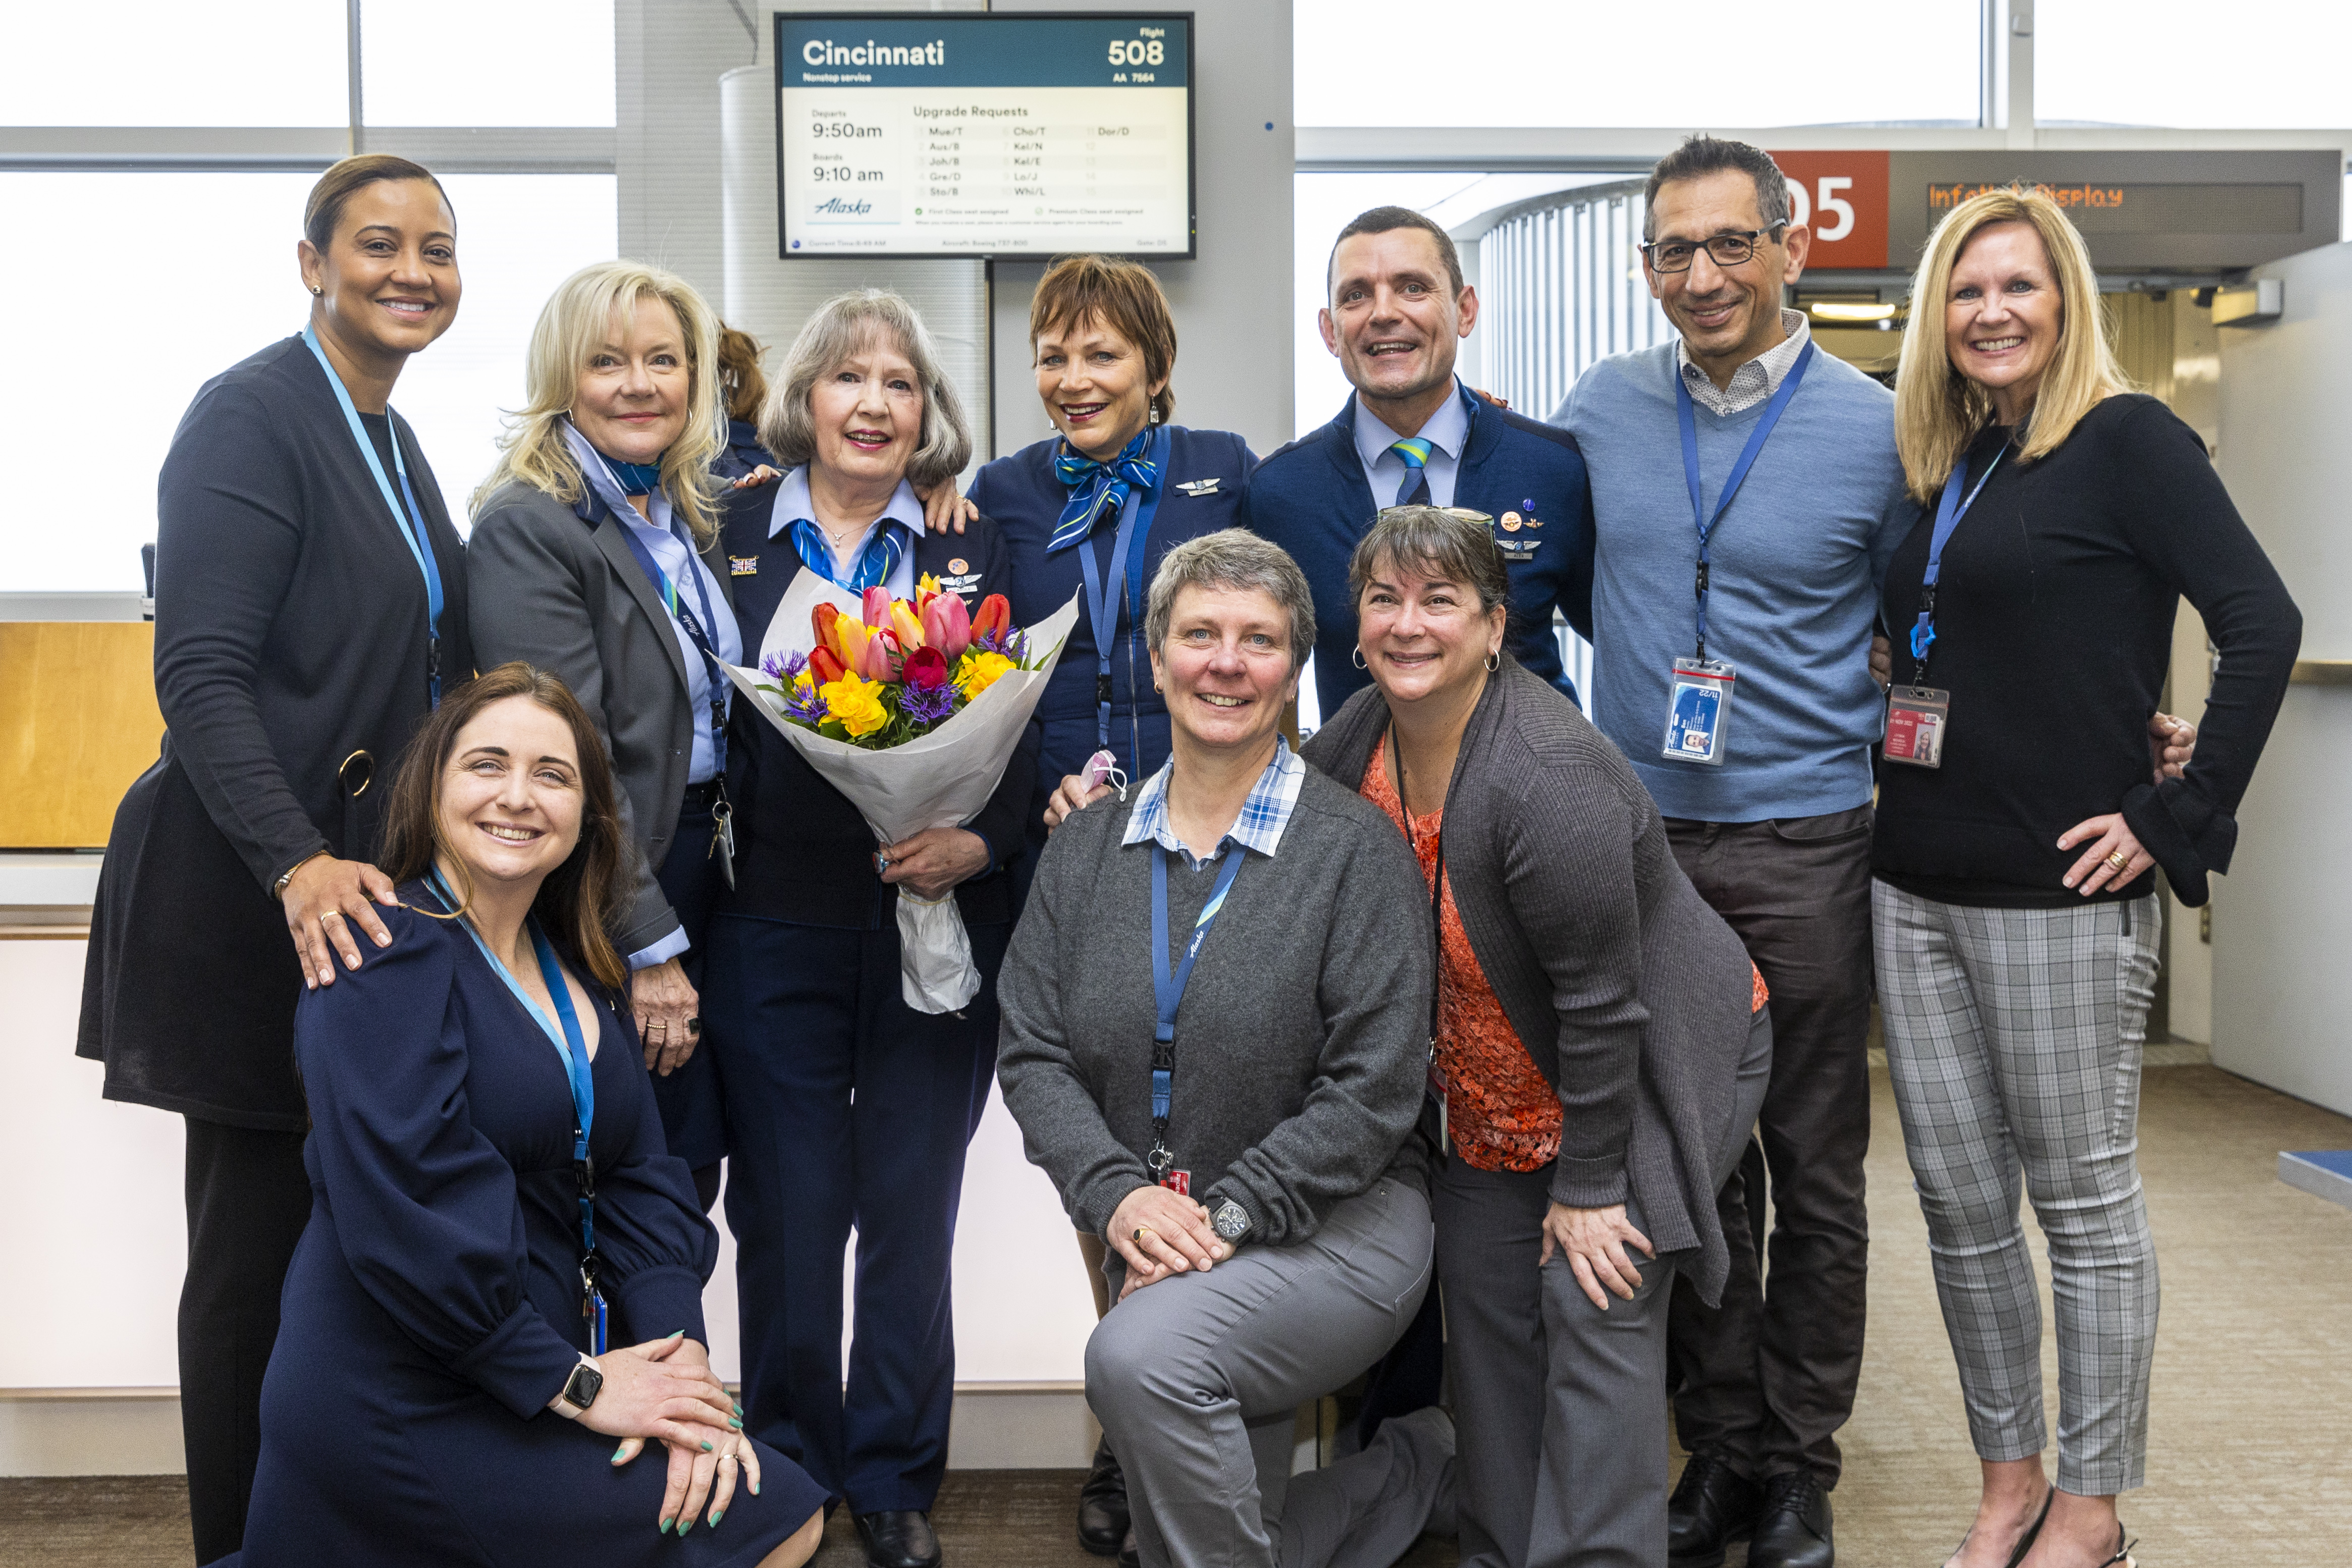 Celebrating Flight Attendants 50 years in the skies for Alaska Airlines